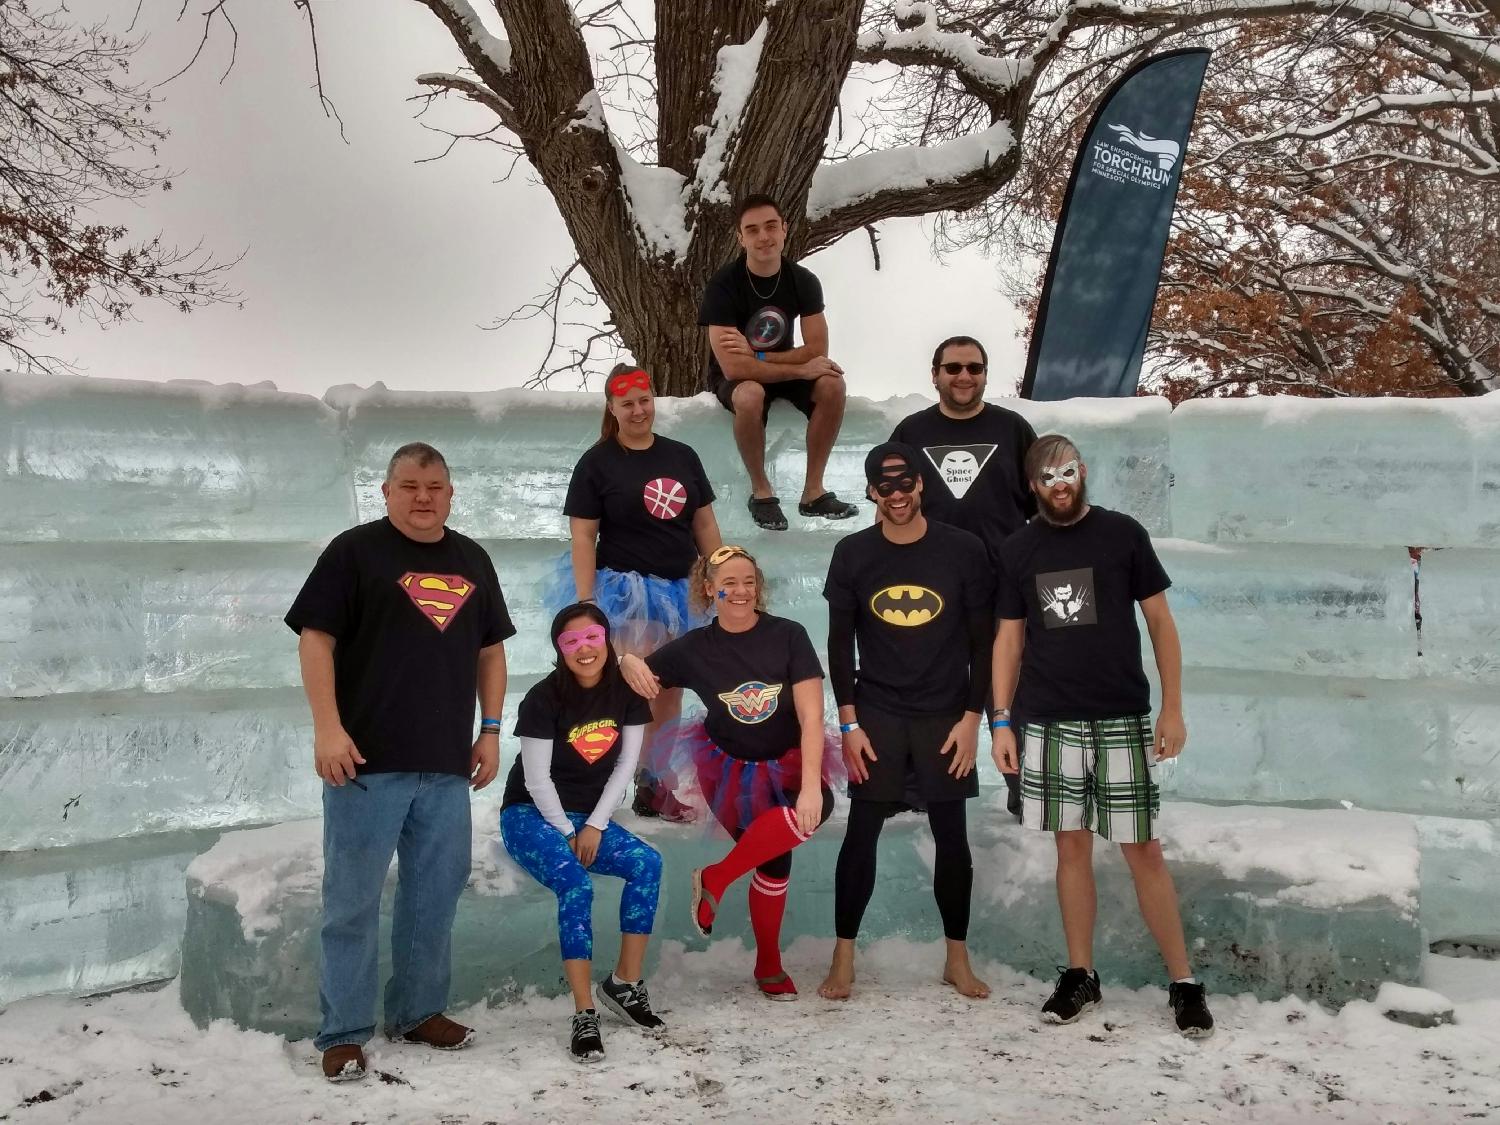 Urban FT Minnesota Team at the Polar Plunge for a Cause